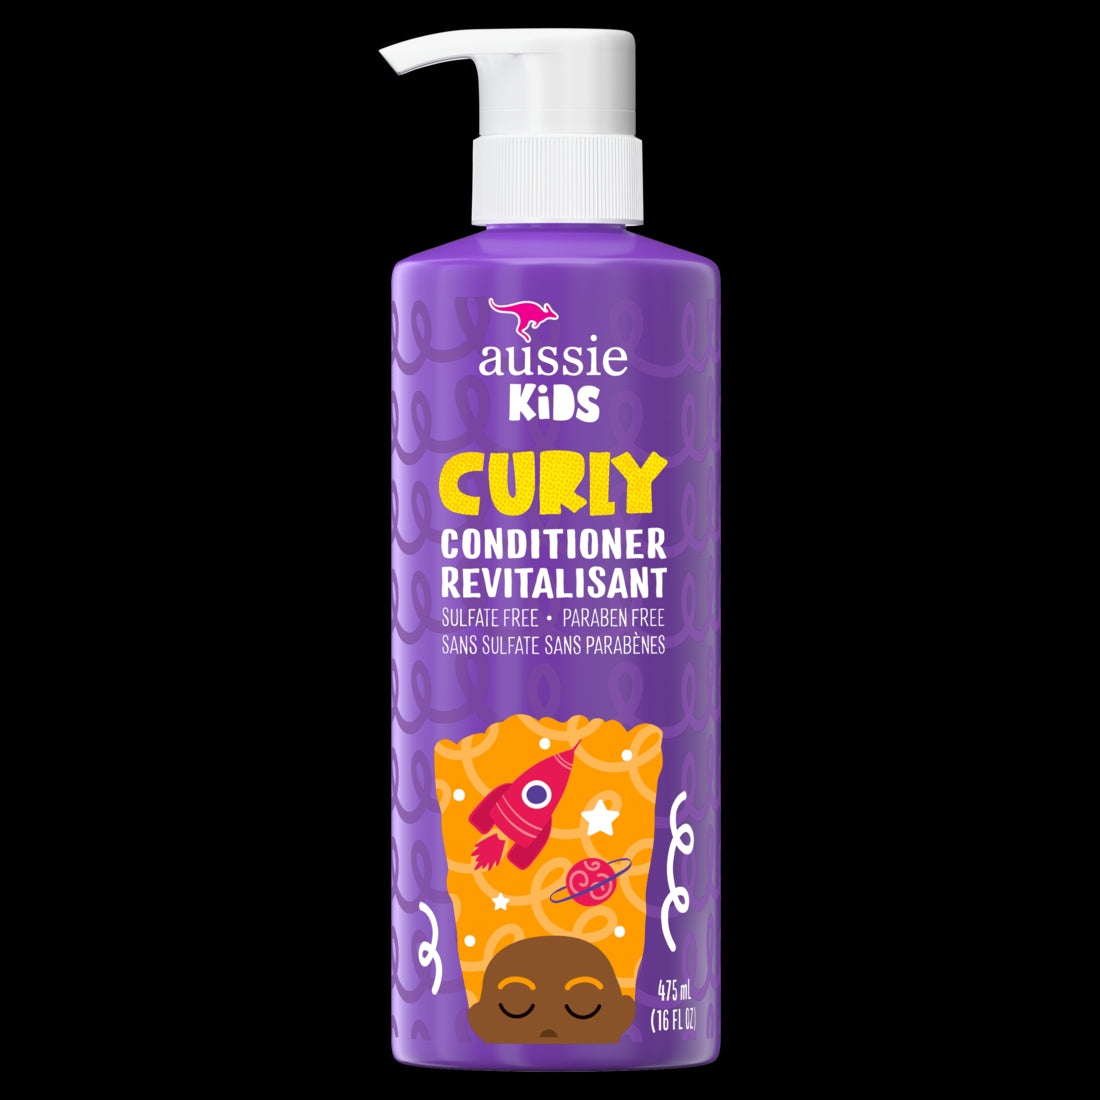 Aussie Kids Curly Sulfate Free Conditioner for Kids - 16oz/4pk